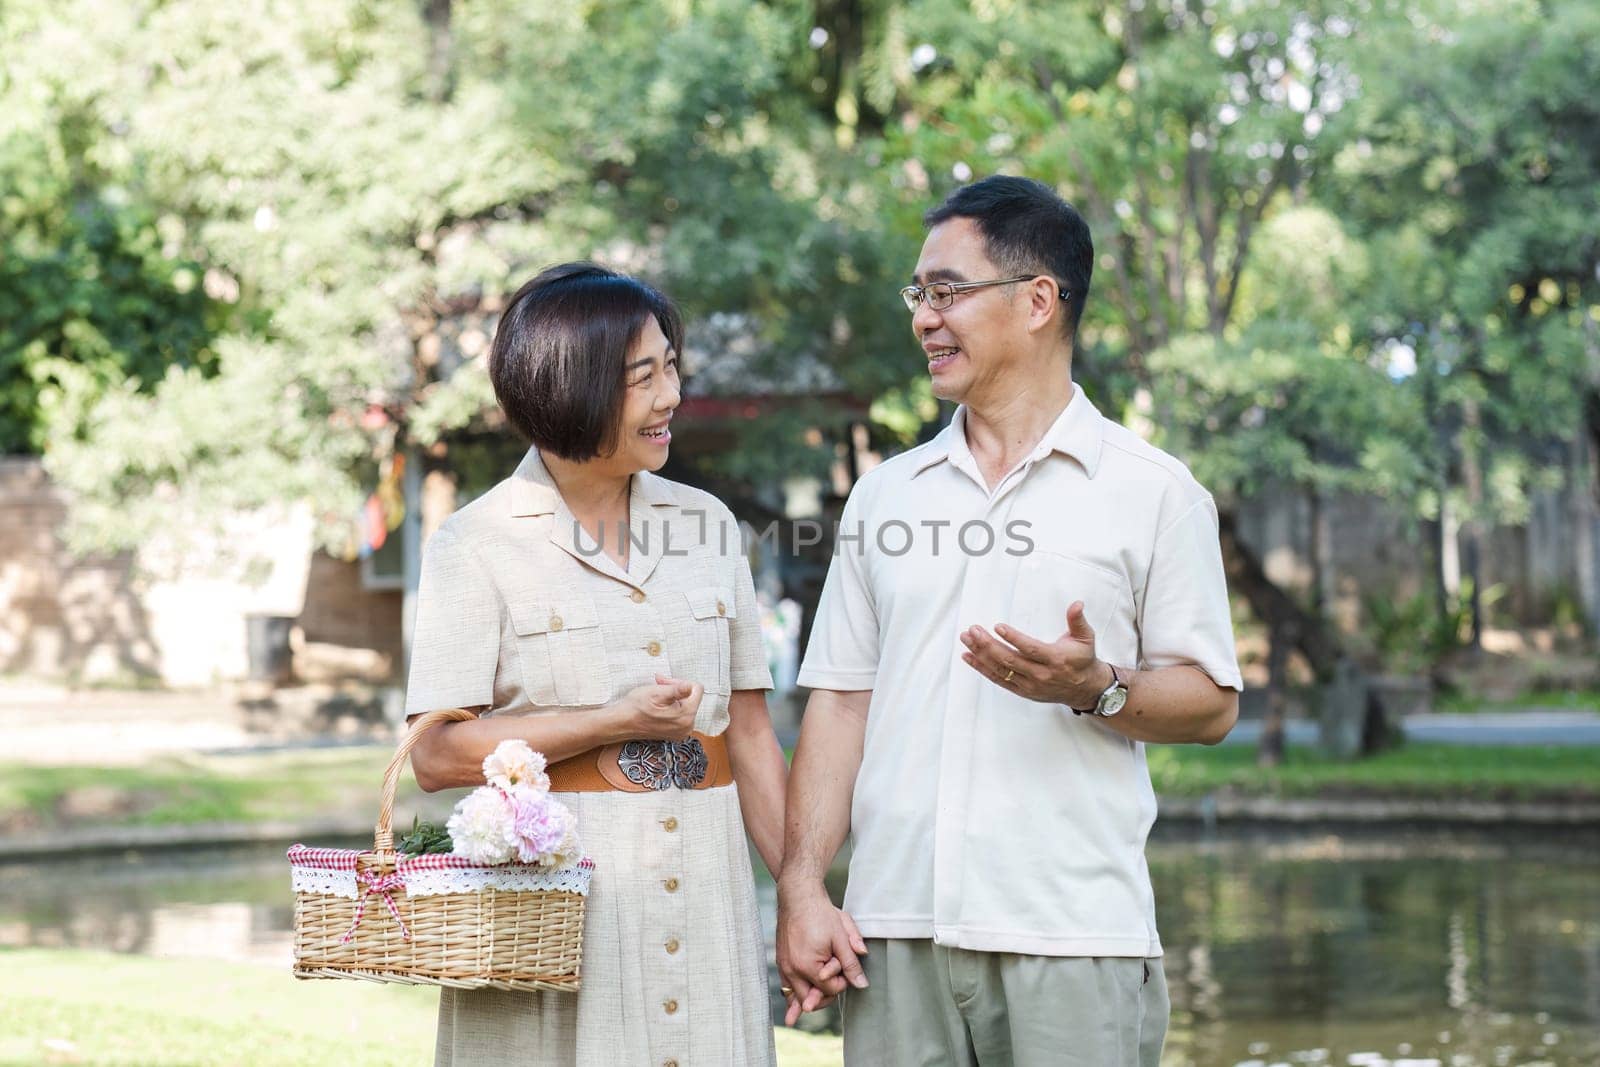 Senior man and wife holding a picnic basket walking among the green trees in the park A retired couple in their 60s walked through the garden together enjoying their vacation..